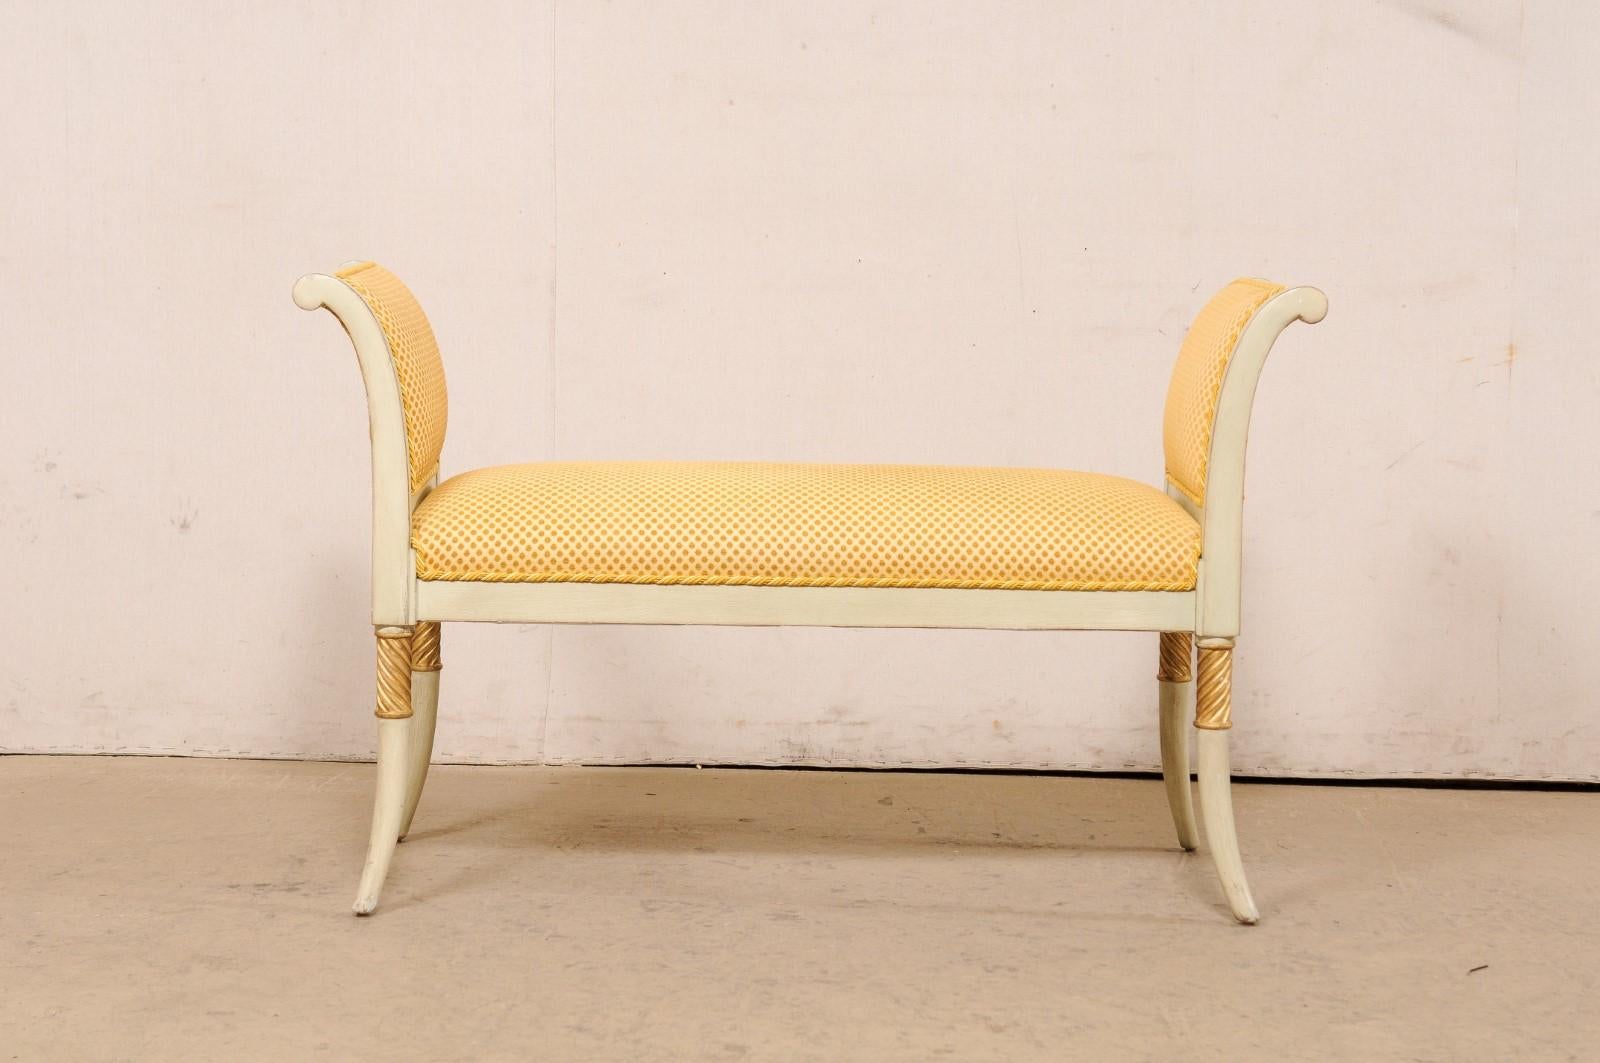 Vintage Italian Upholstered Window Bench, Approximate For Sale 2